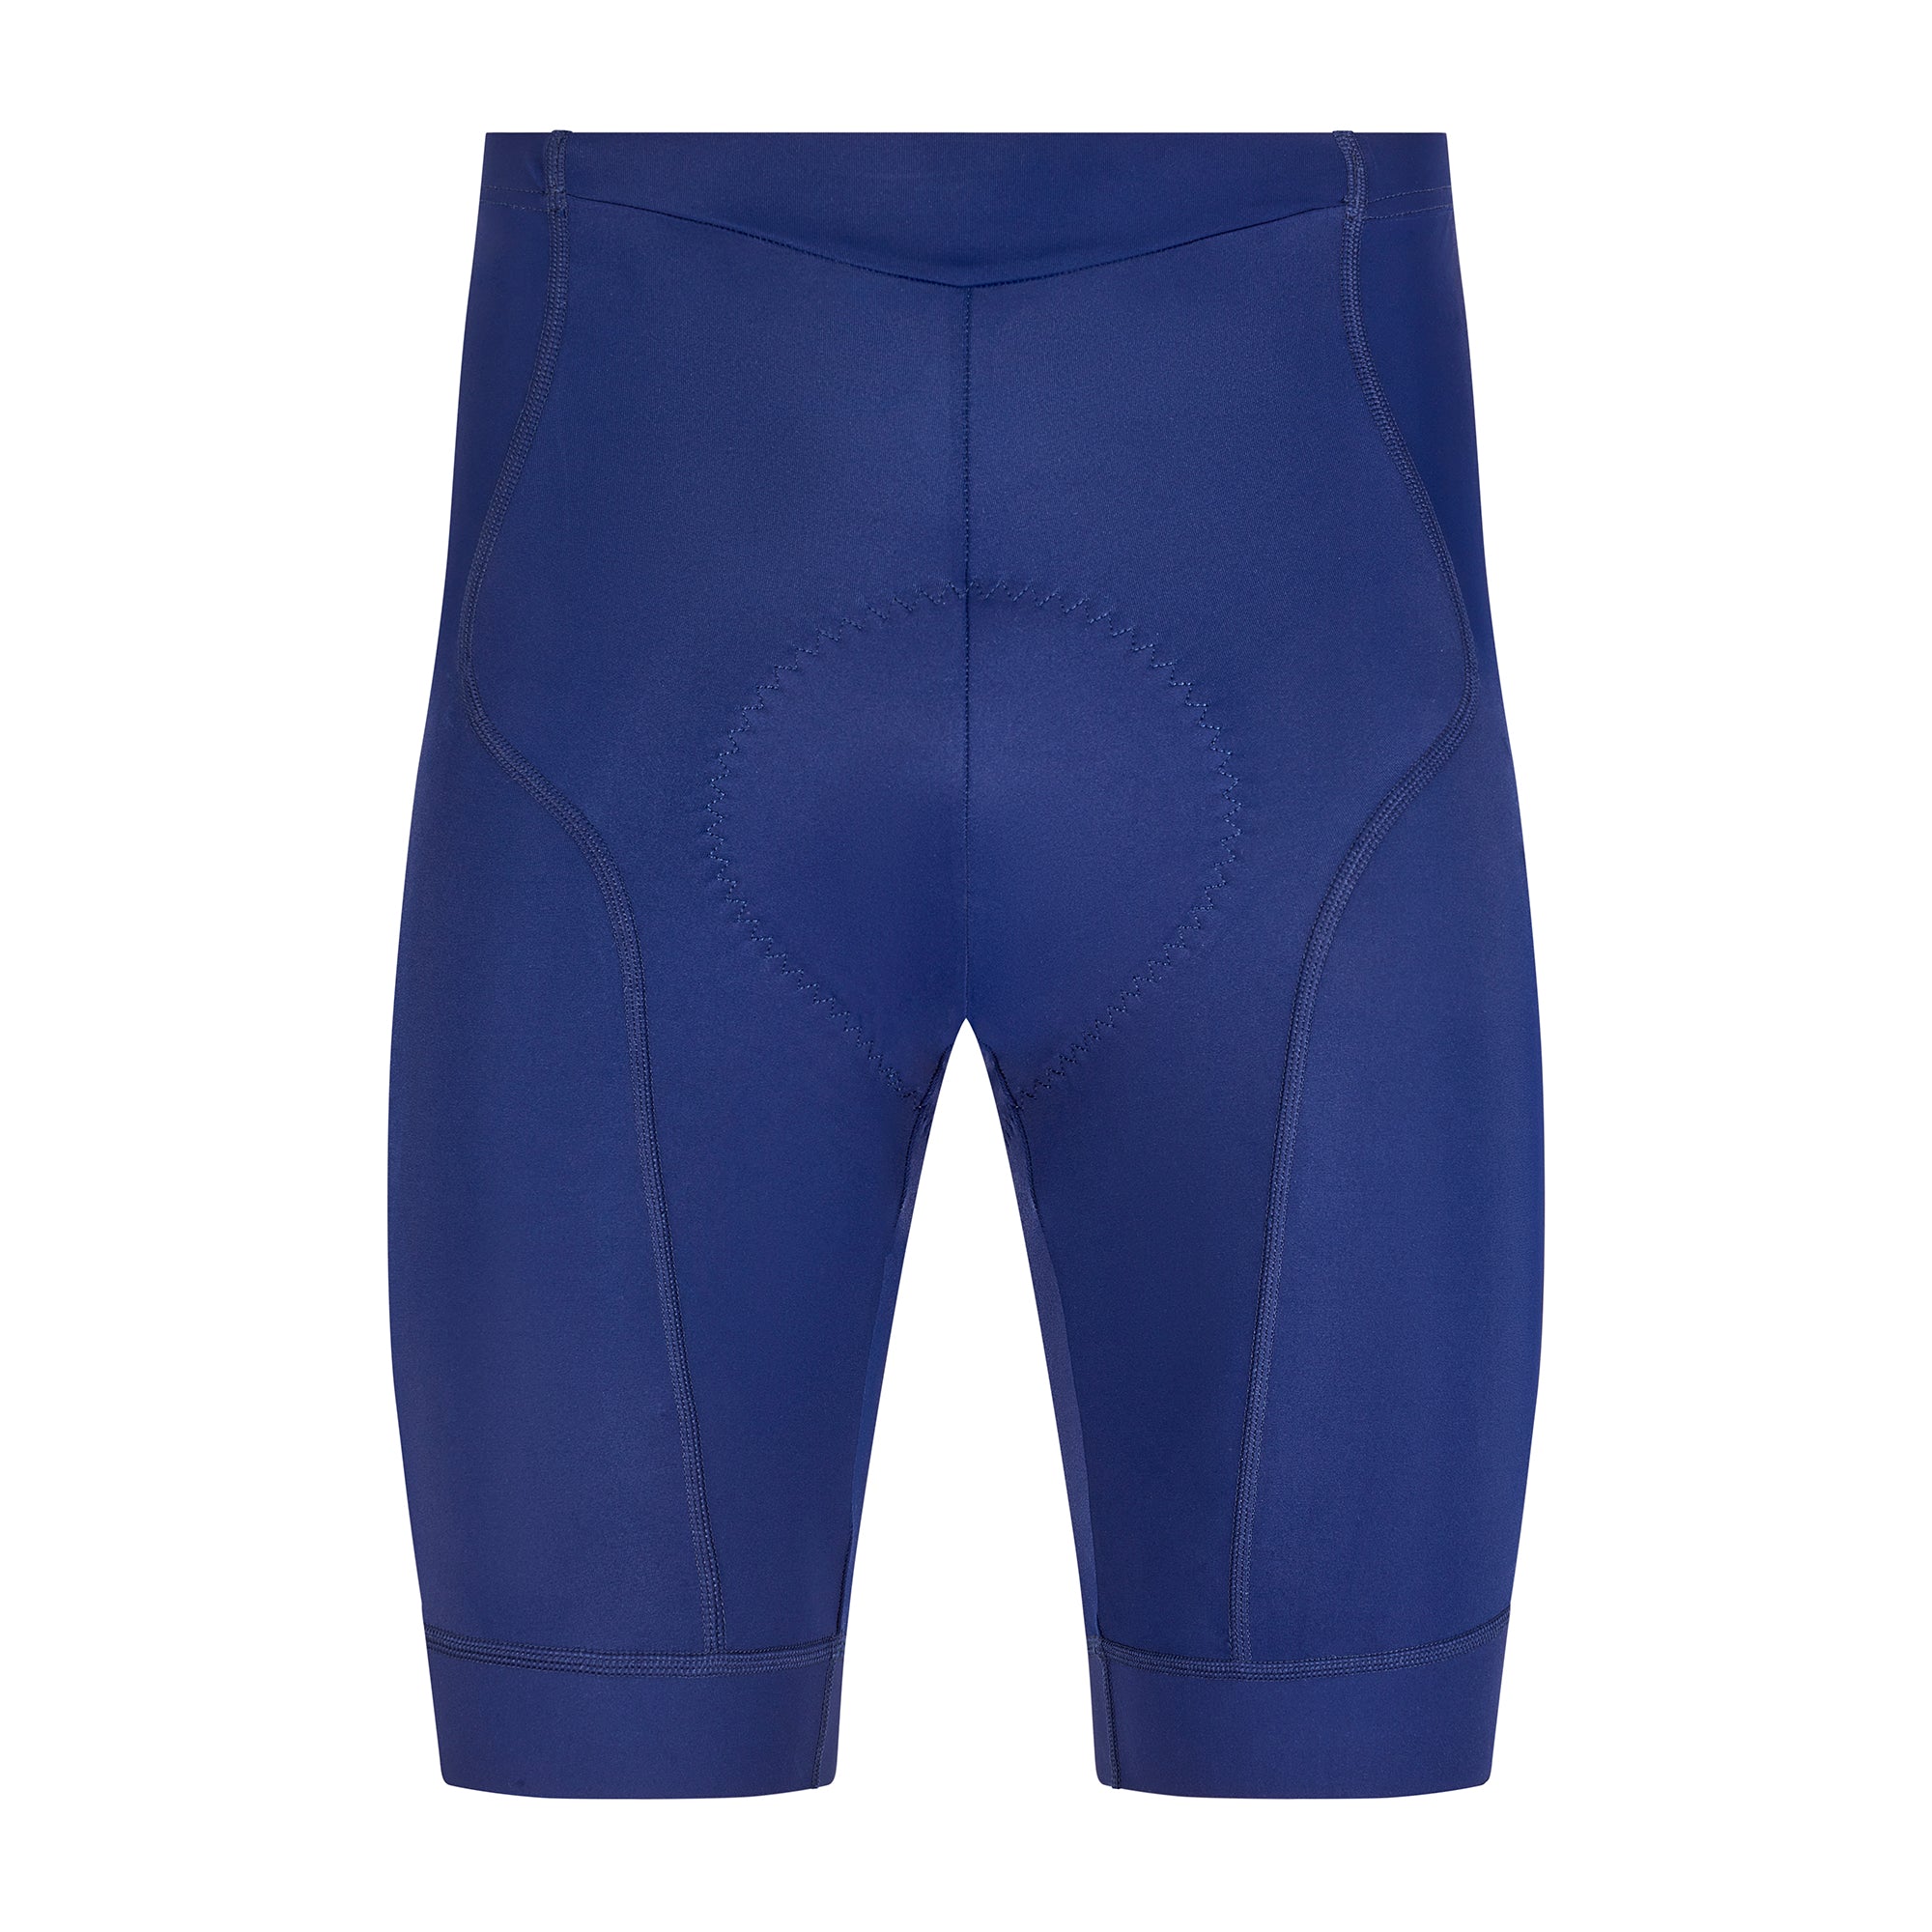 Women's Essential Cycling Shorts - Navy